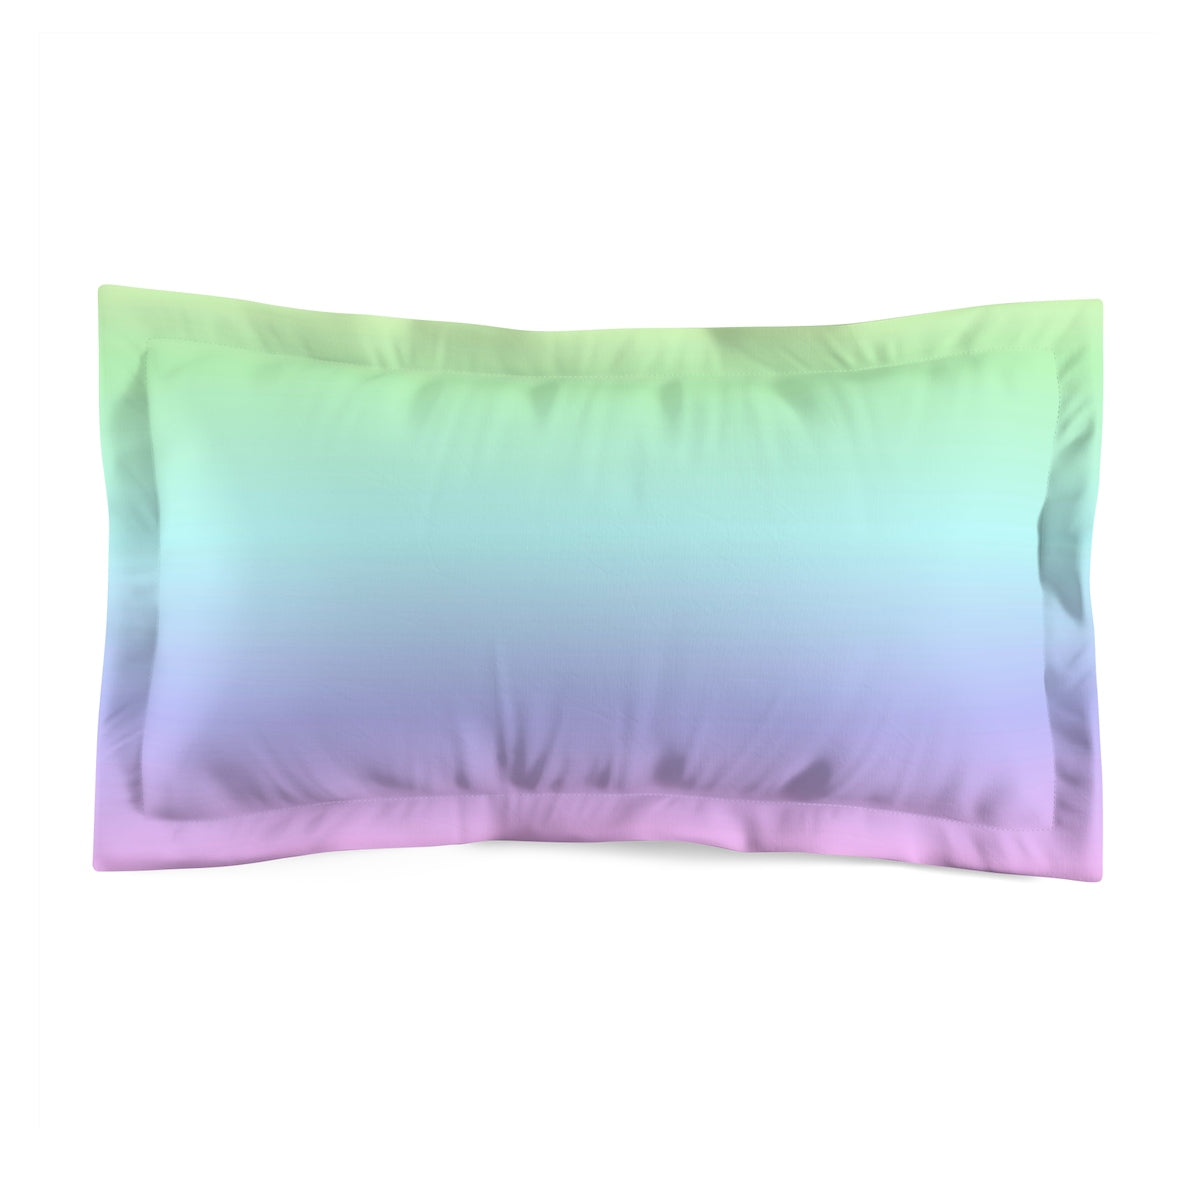 Pastel Rainbow Microfiber Pillow Sham Cover, Ombre Tie Dye Pink King Queen Matching with Duvet Cover Throw Bed Pillow Case Starcove Fashion